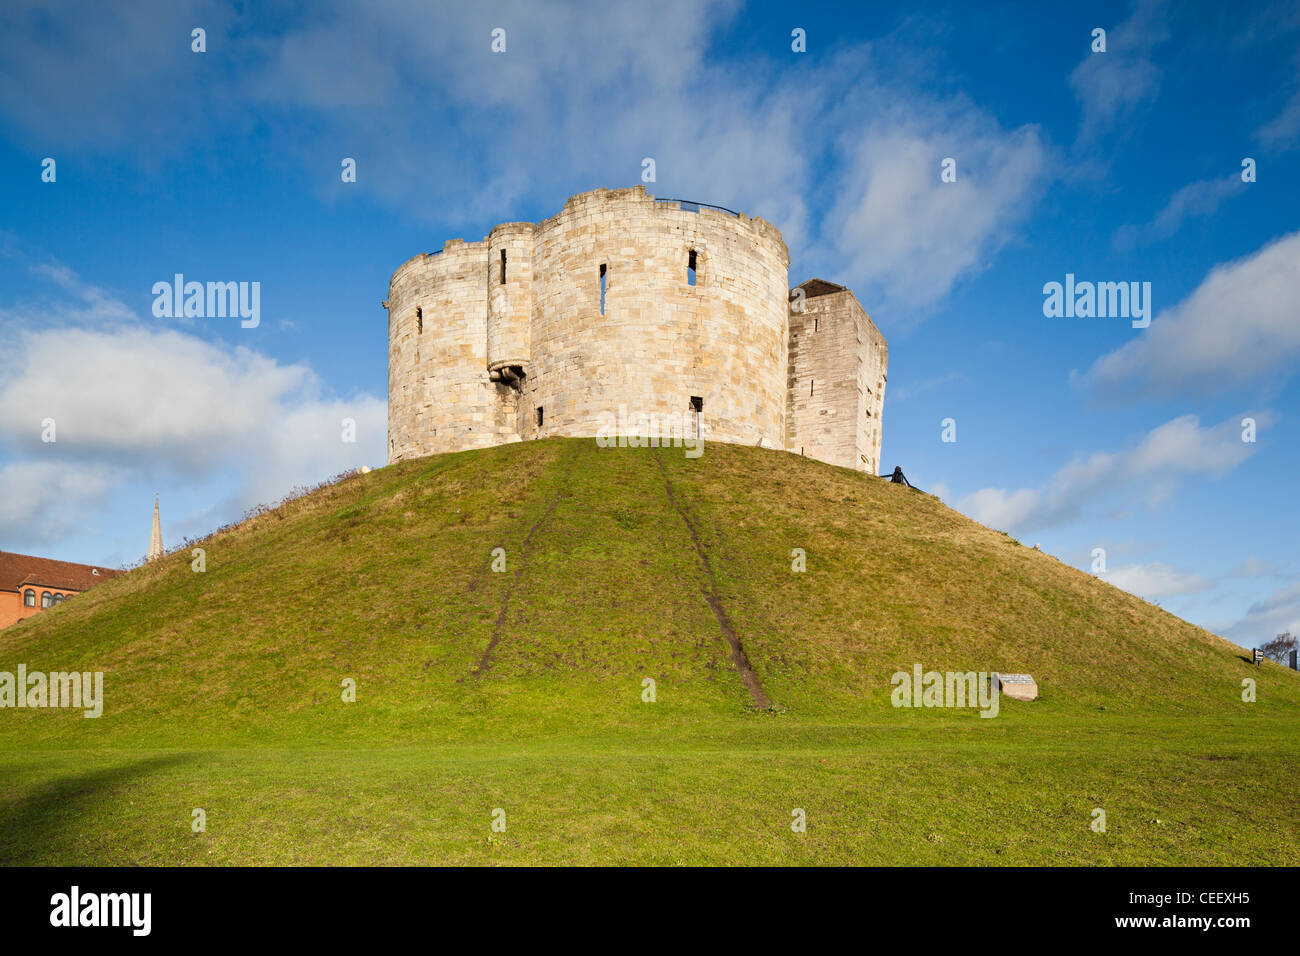 Cliffords Tower in the heart of The historic city of York, North Yorkshire, UK Stock Photo